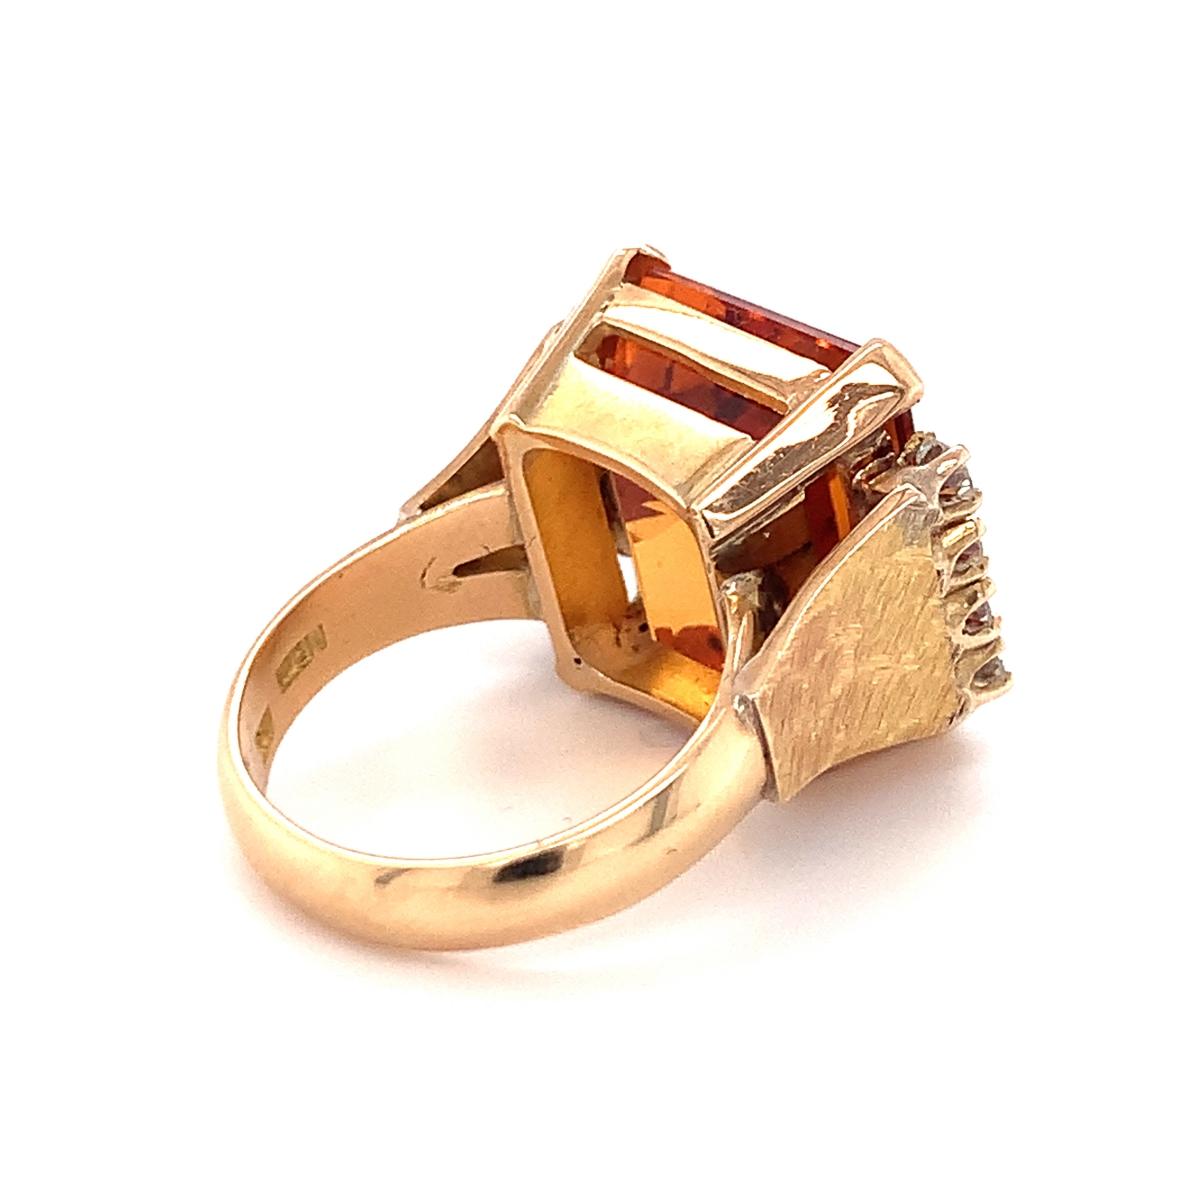 Citrine and Diamond Ring in 18K Yellow Gold, circa 1960s For Sale 2